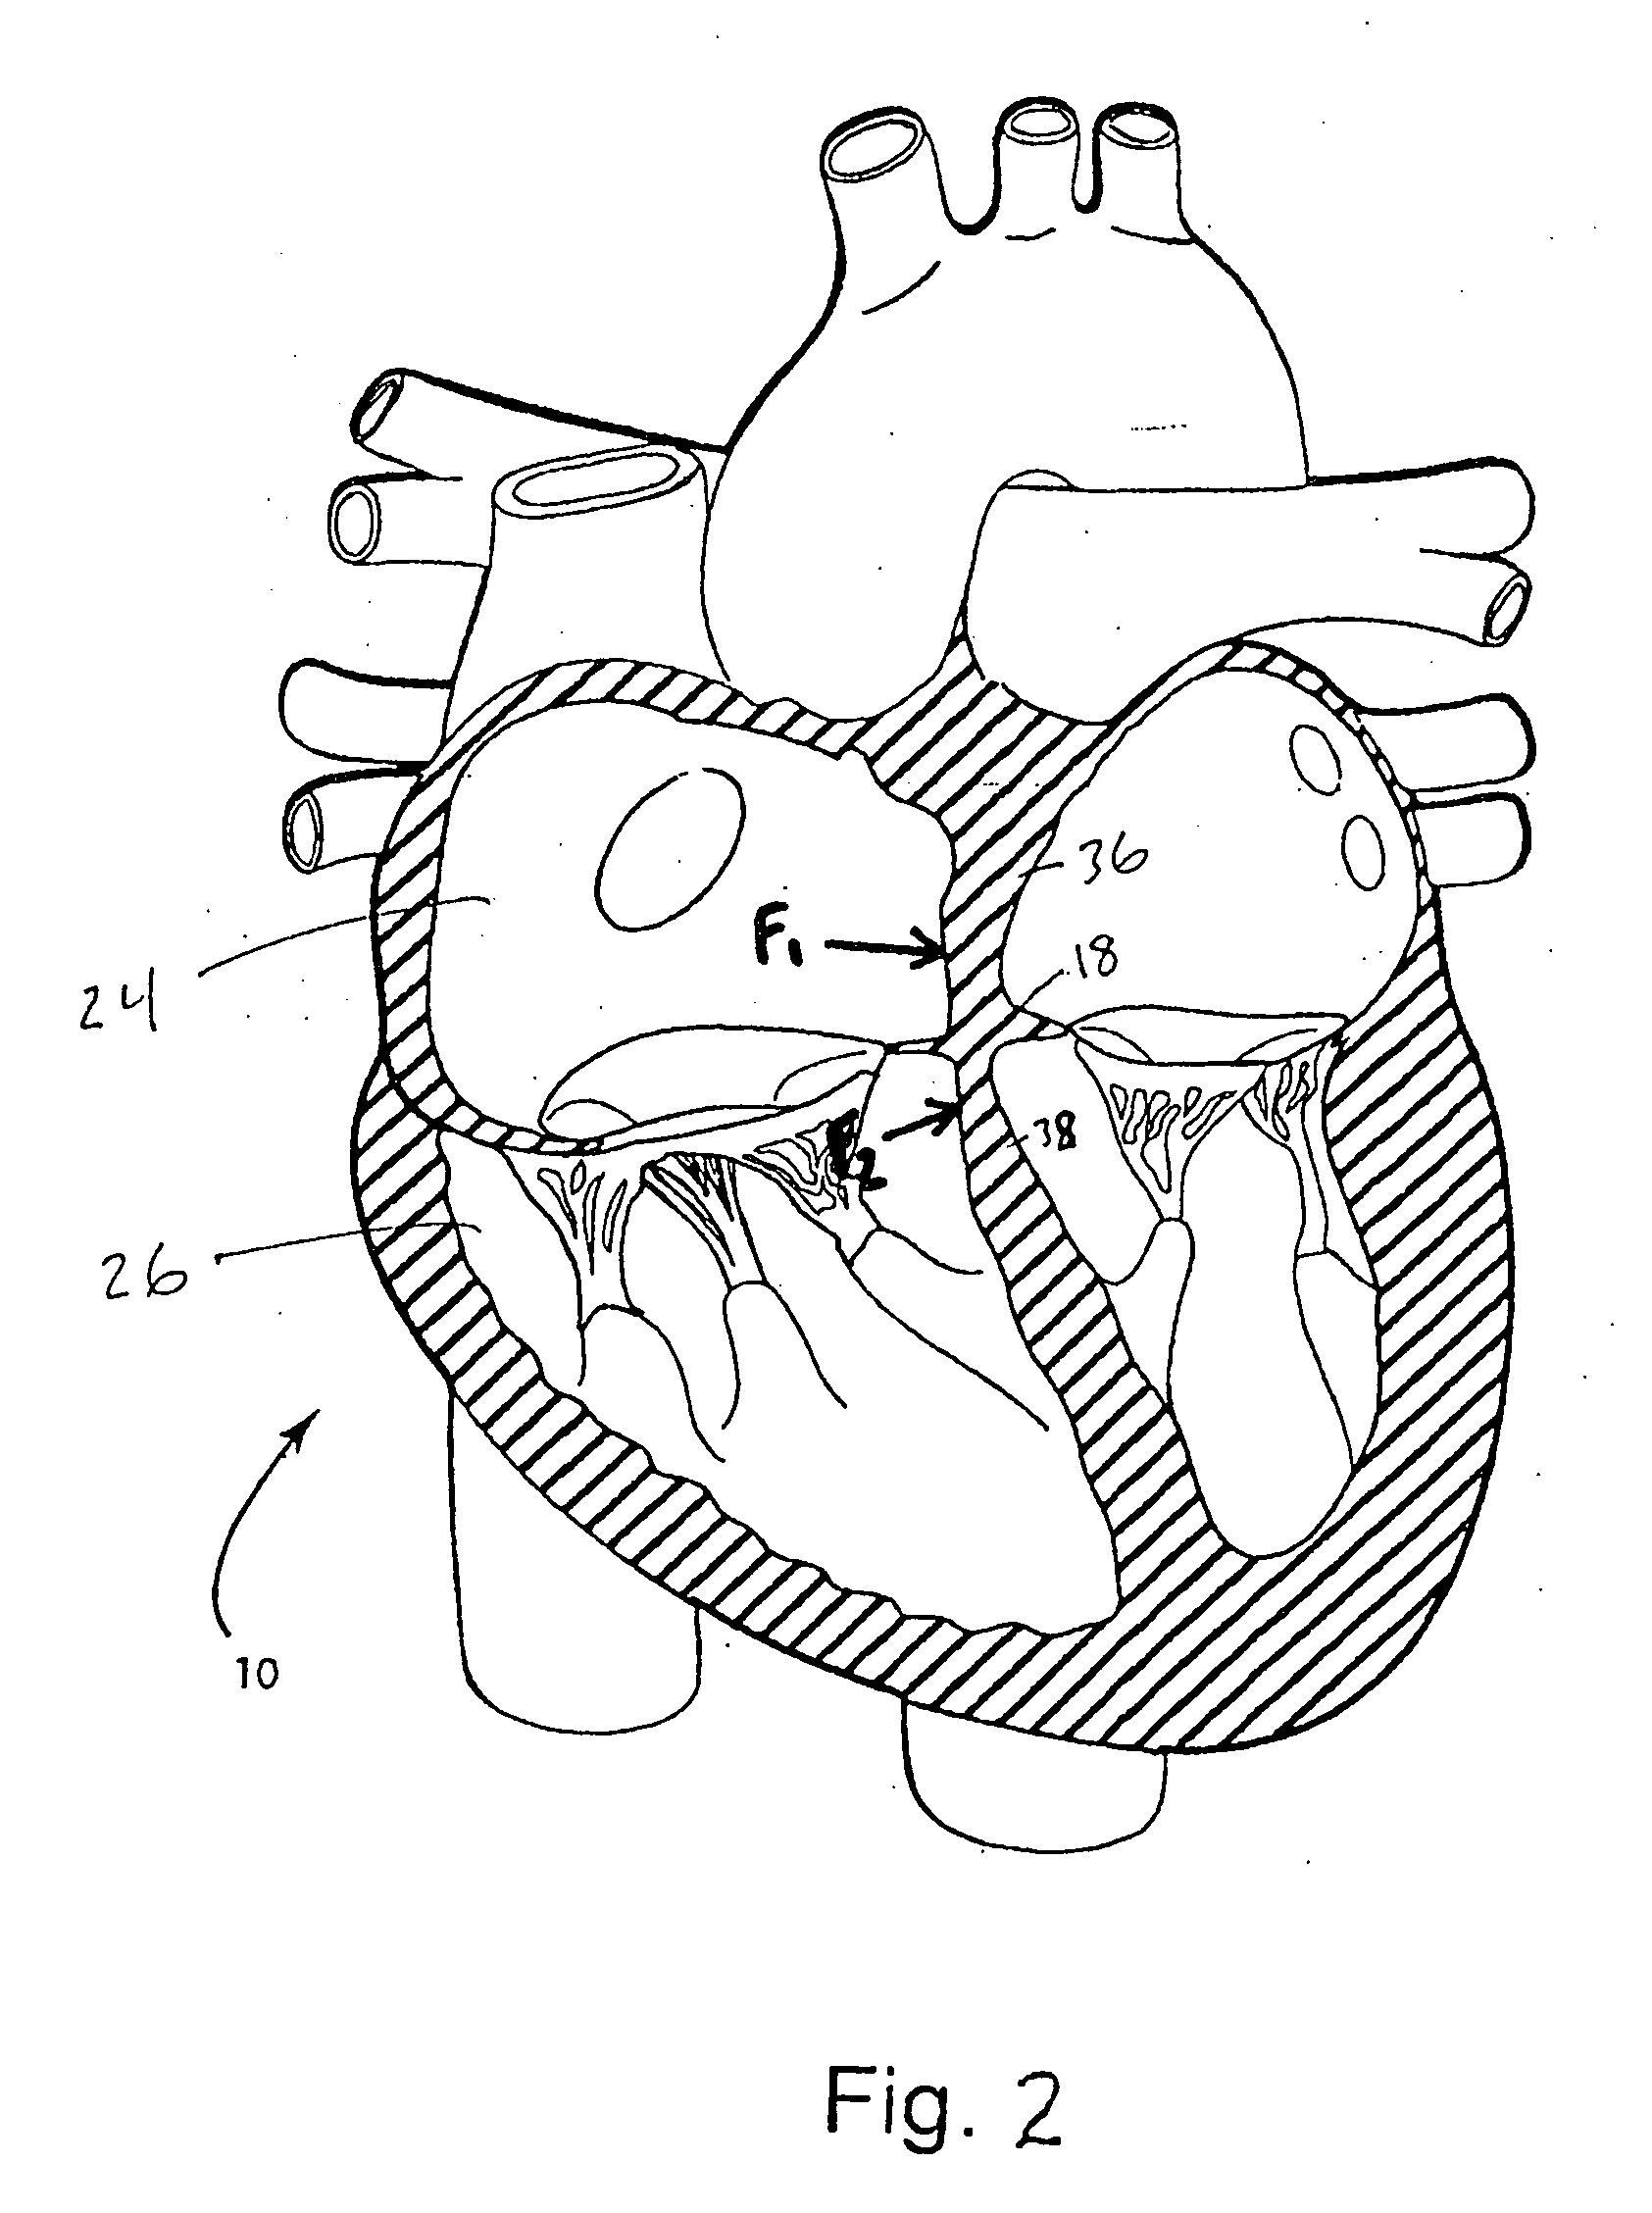 Device and method for reshaping mitral valve annulus